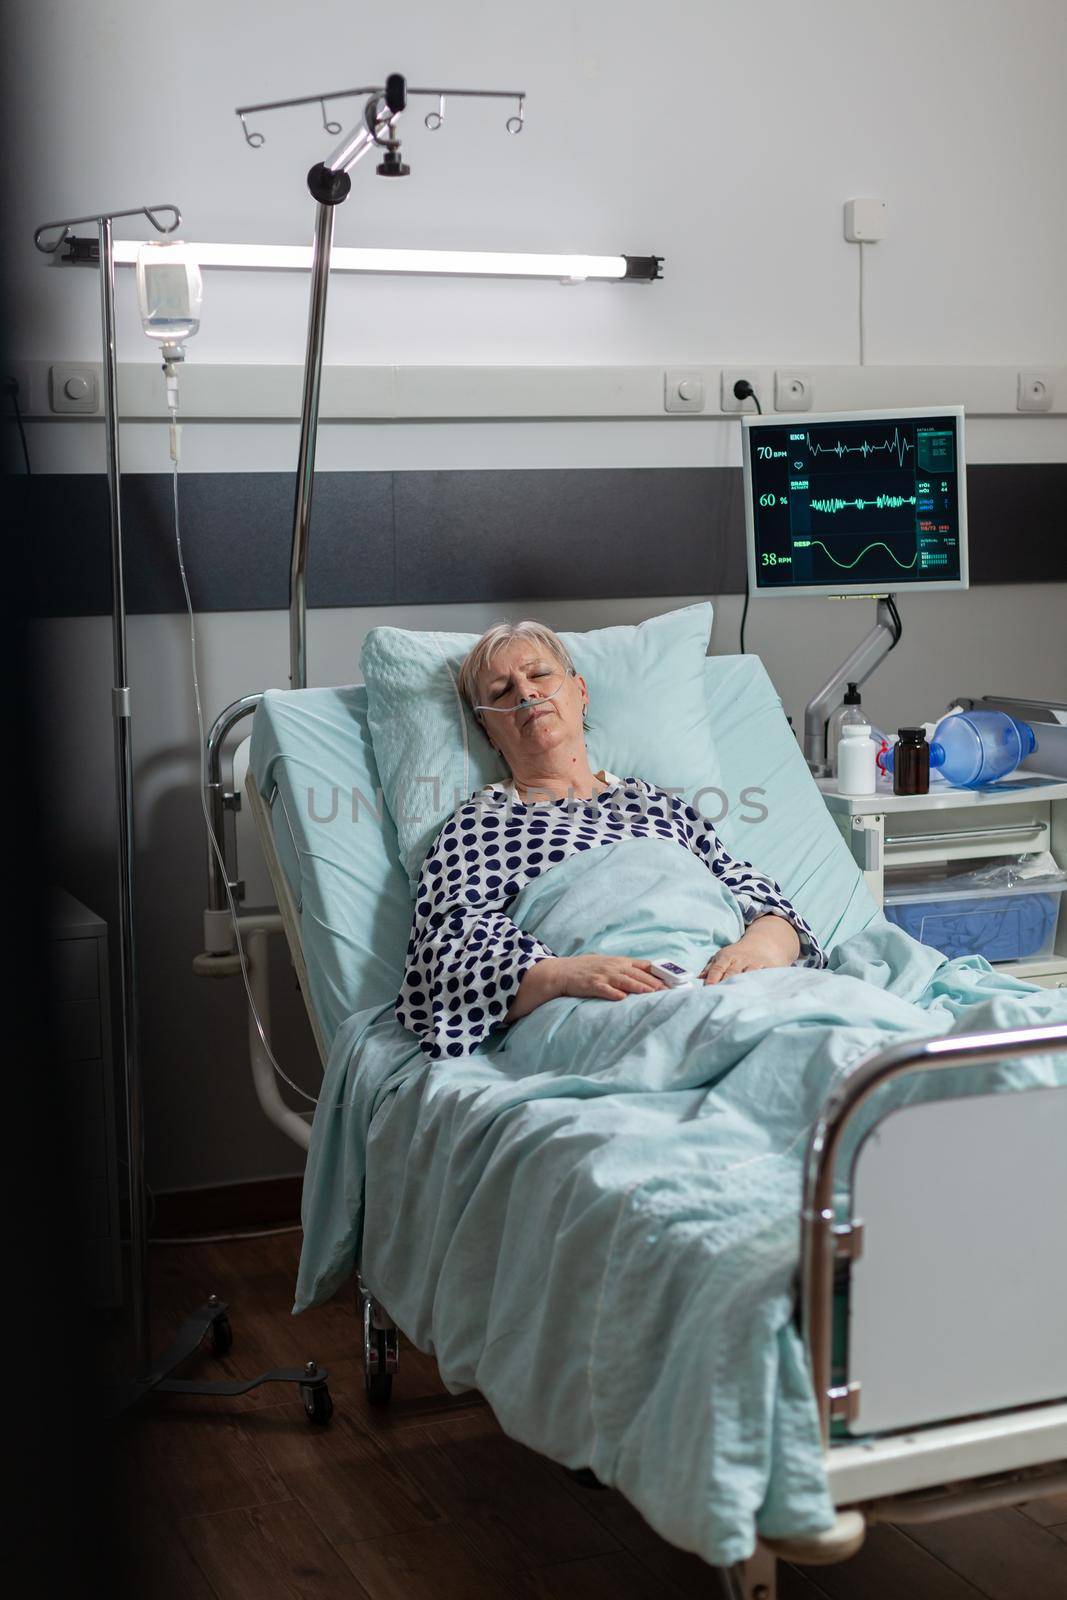 Elderly patient following recovery treatment laying in hospital bed, getting intravenous medicine from iv drip bag. Breathing through oxygen tube because of pulmonary failure.